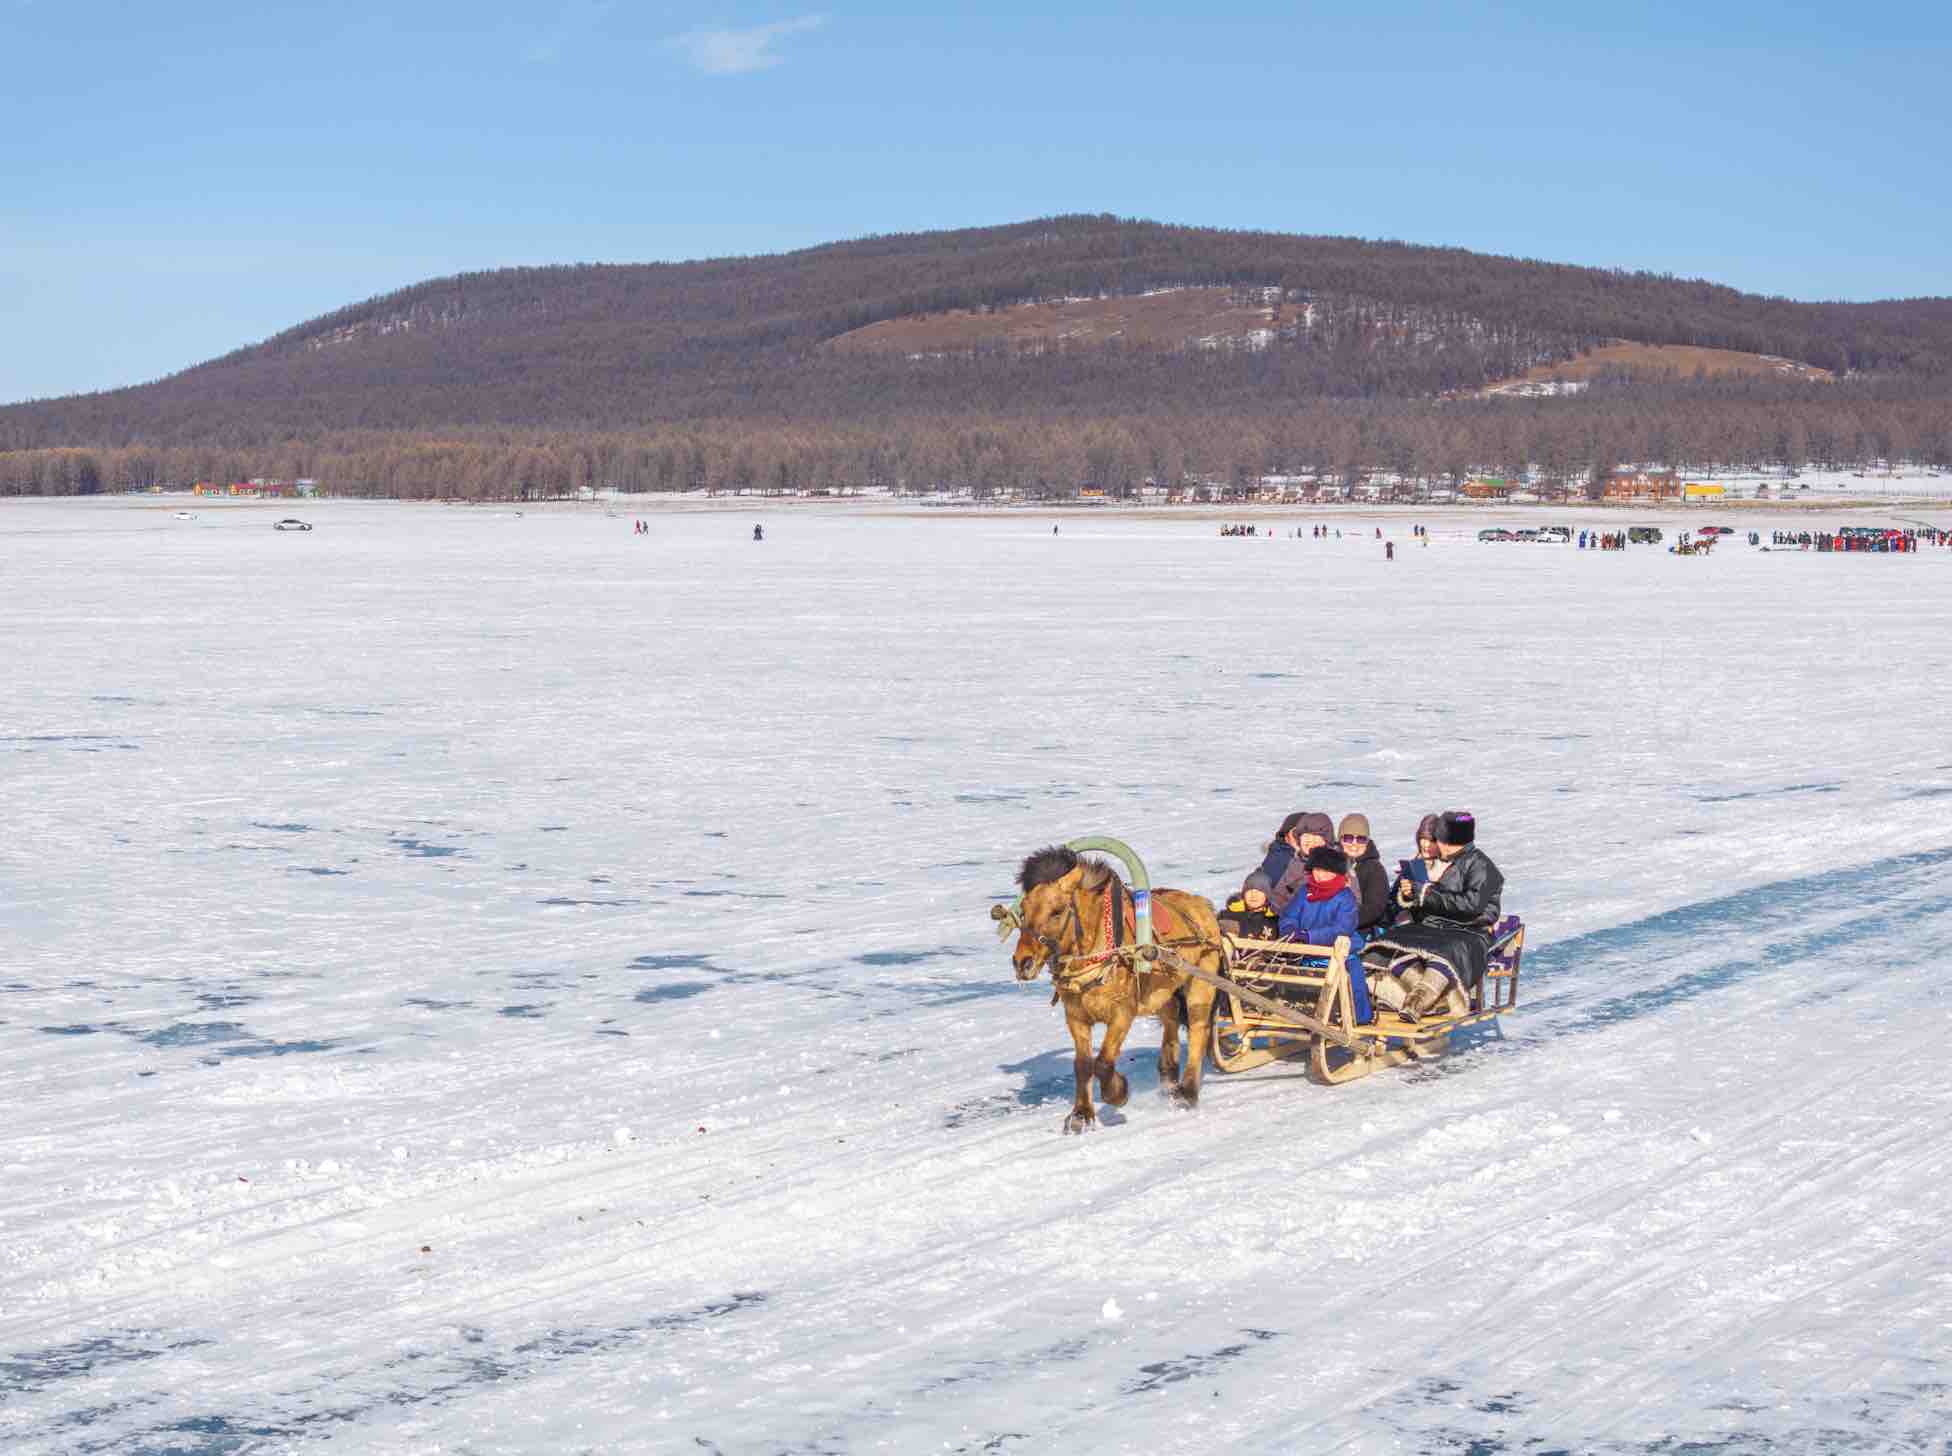 A stunning image of Mongolia in winter showcasing a group of people enjoying winter activities such as skiing and snowboarding.